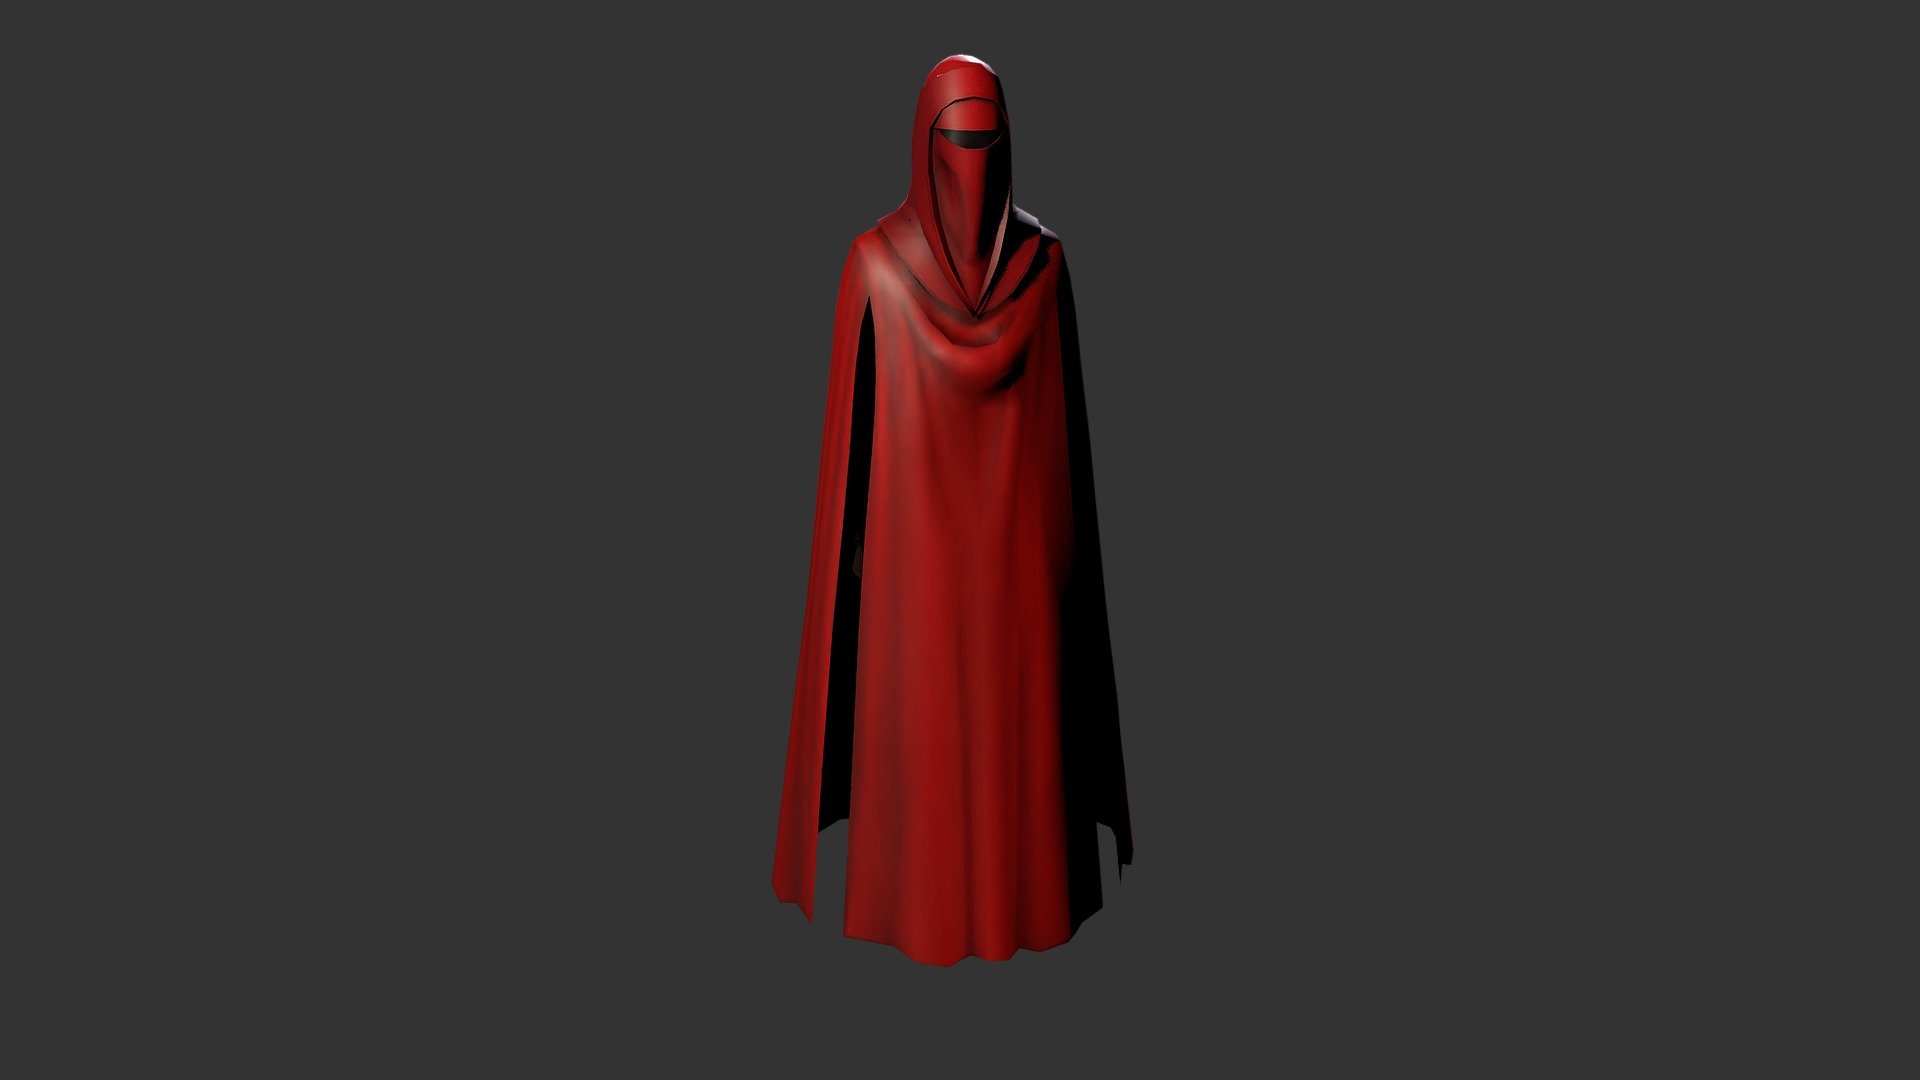 Resplendent in crimson robes and armor, the Imperial Royal Guard protected the Emperor. Secrecy shrouded the Guard, with rumors abounding about the sentinels' backgrounds and combat capabilities.

This Royal Guard is just one of the many Star Wars exhibits that can seen in the  Star Wars Virtual Museum.

Download the Star Wars Virtual Museum here:

http://www.starwarsvirtualmuseum.com - Imperial Royal Guard - 3D model by Mind Mulch for The Masses (@mindmulchforthemasses) 3d model